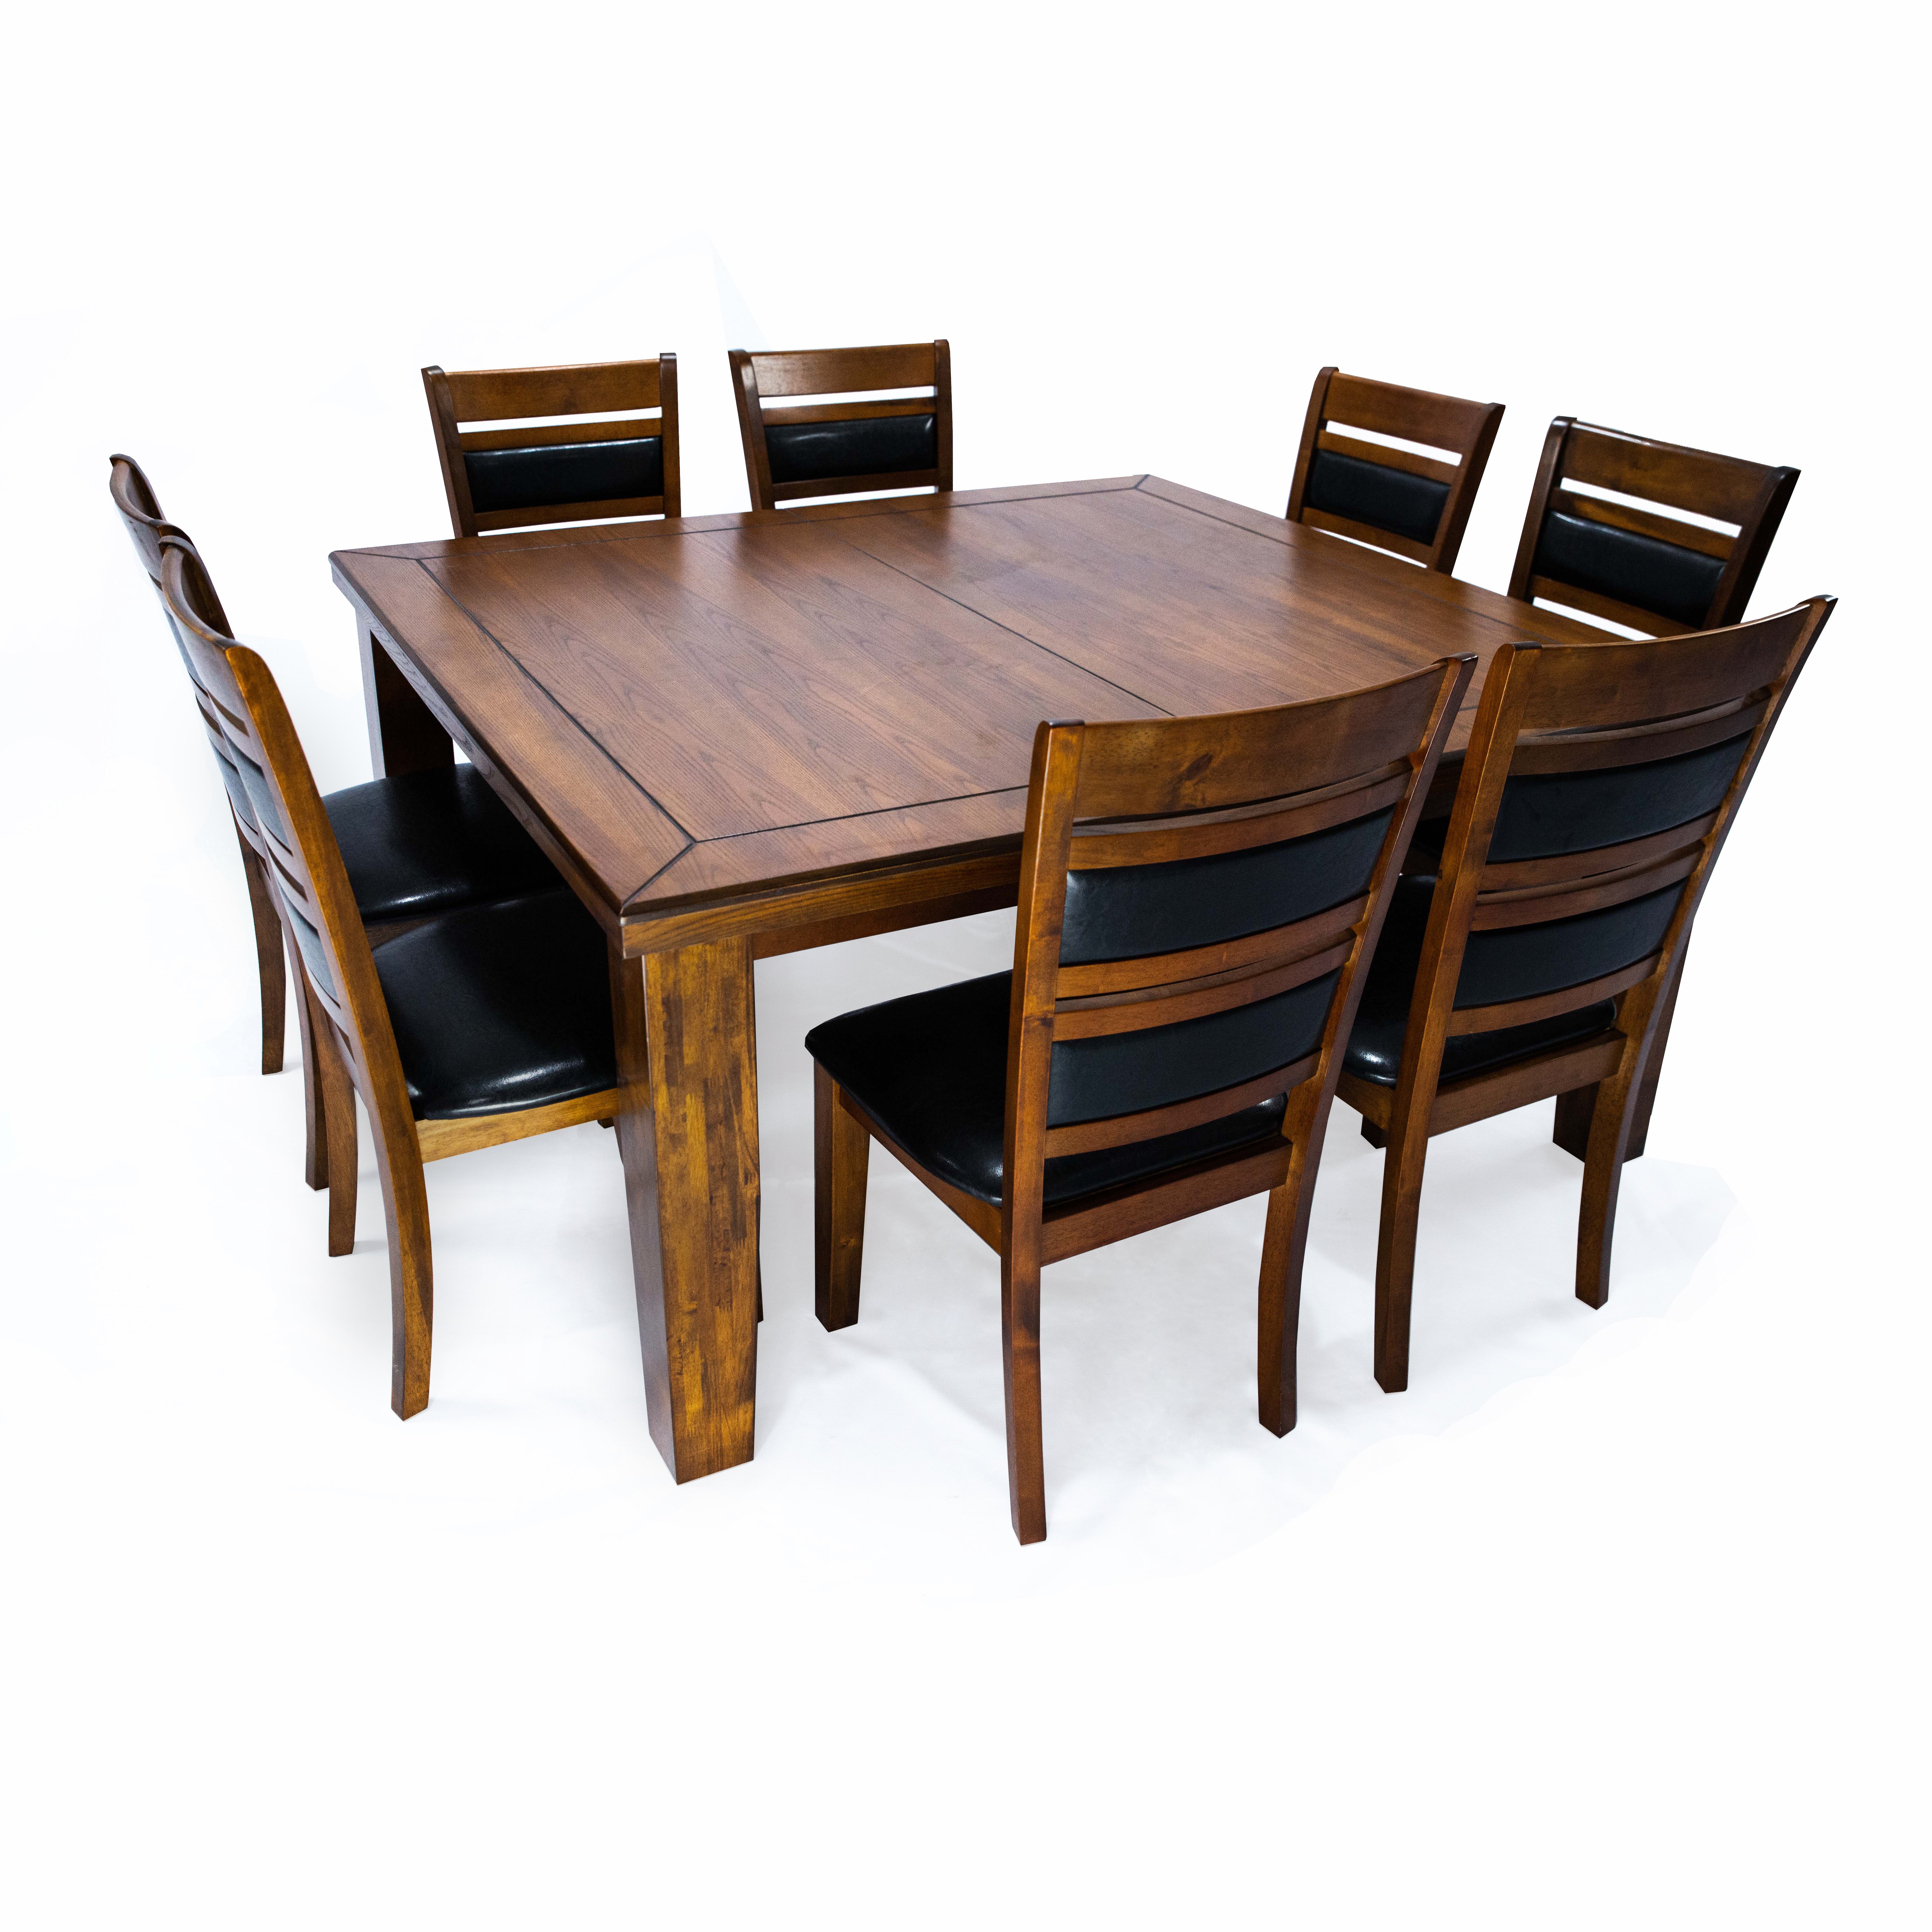 Square Dining Table 8 Seater, 8 Seater Square Dining Room Table